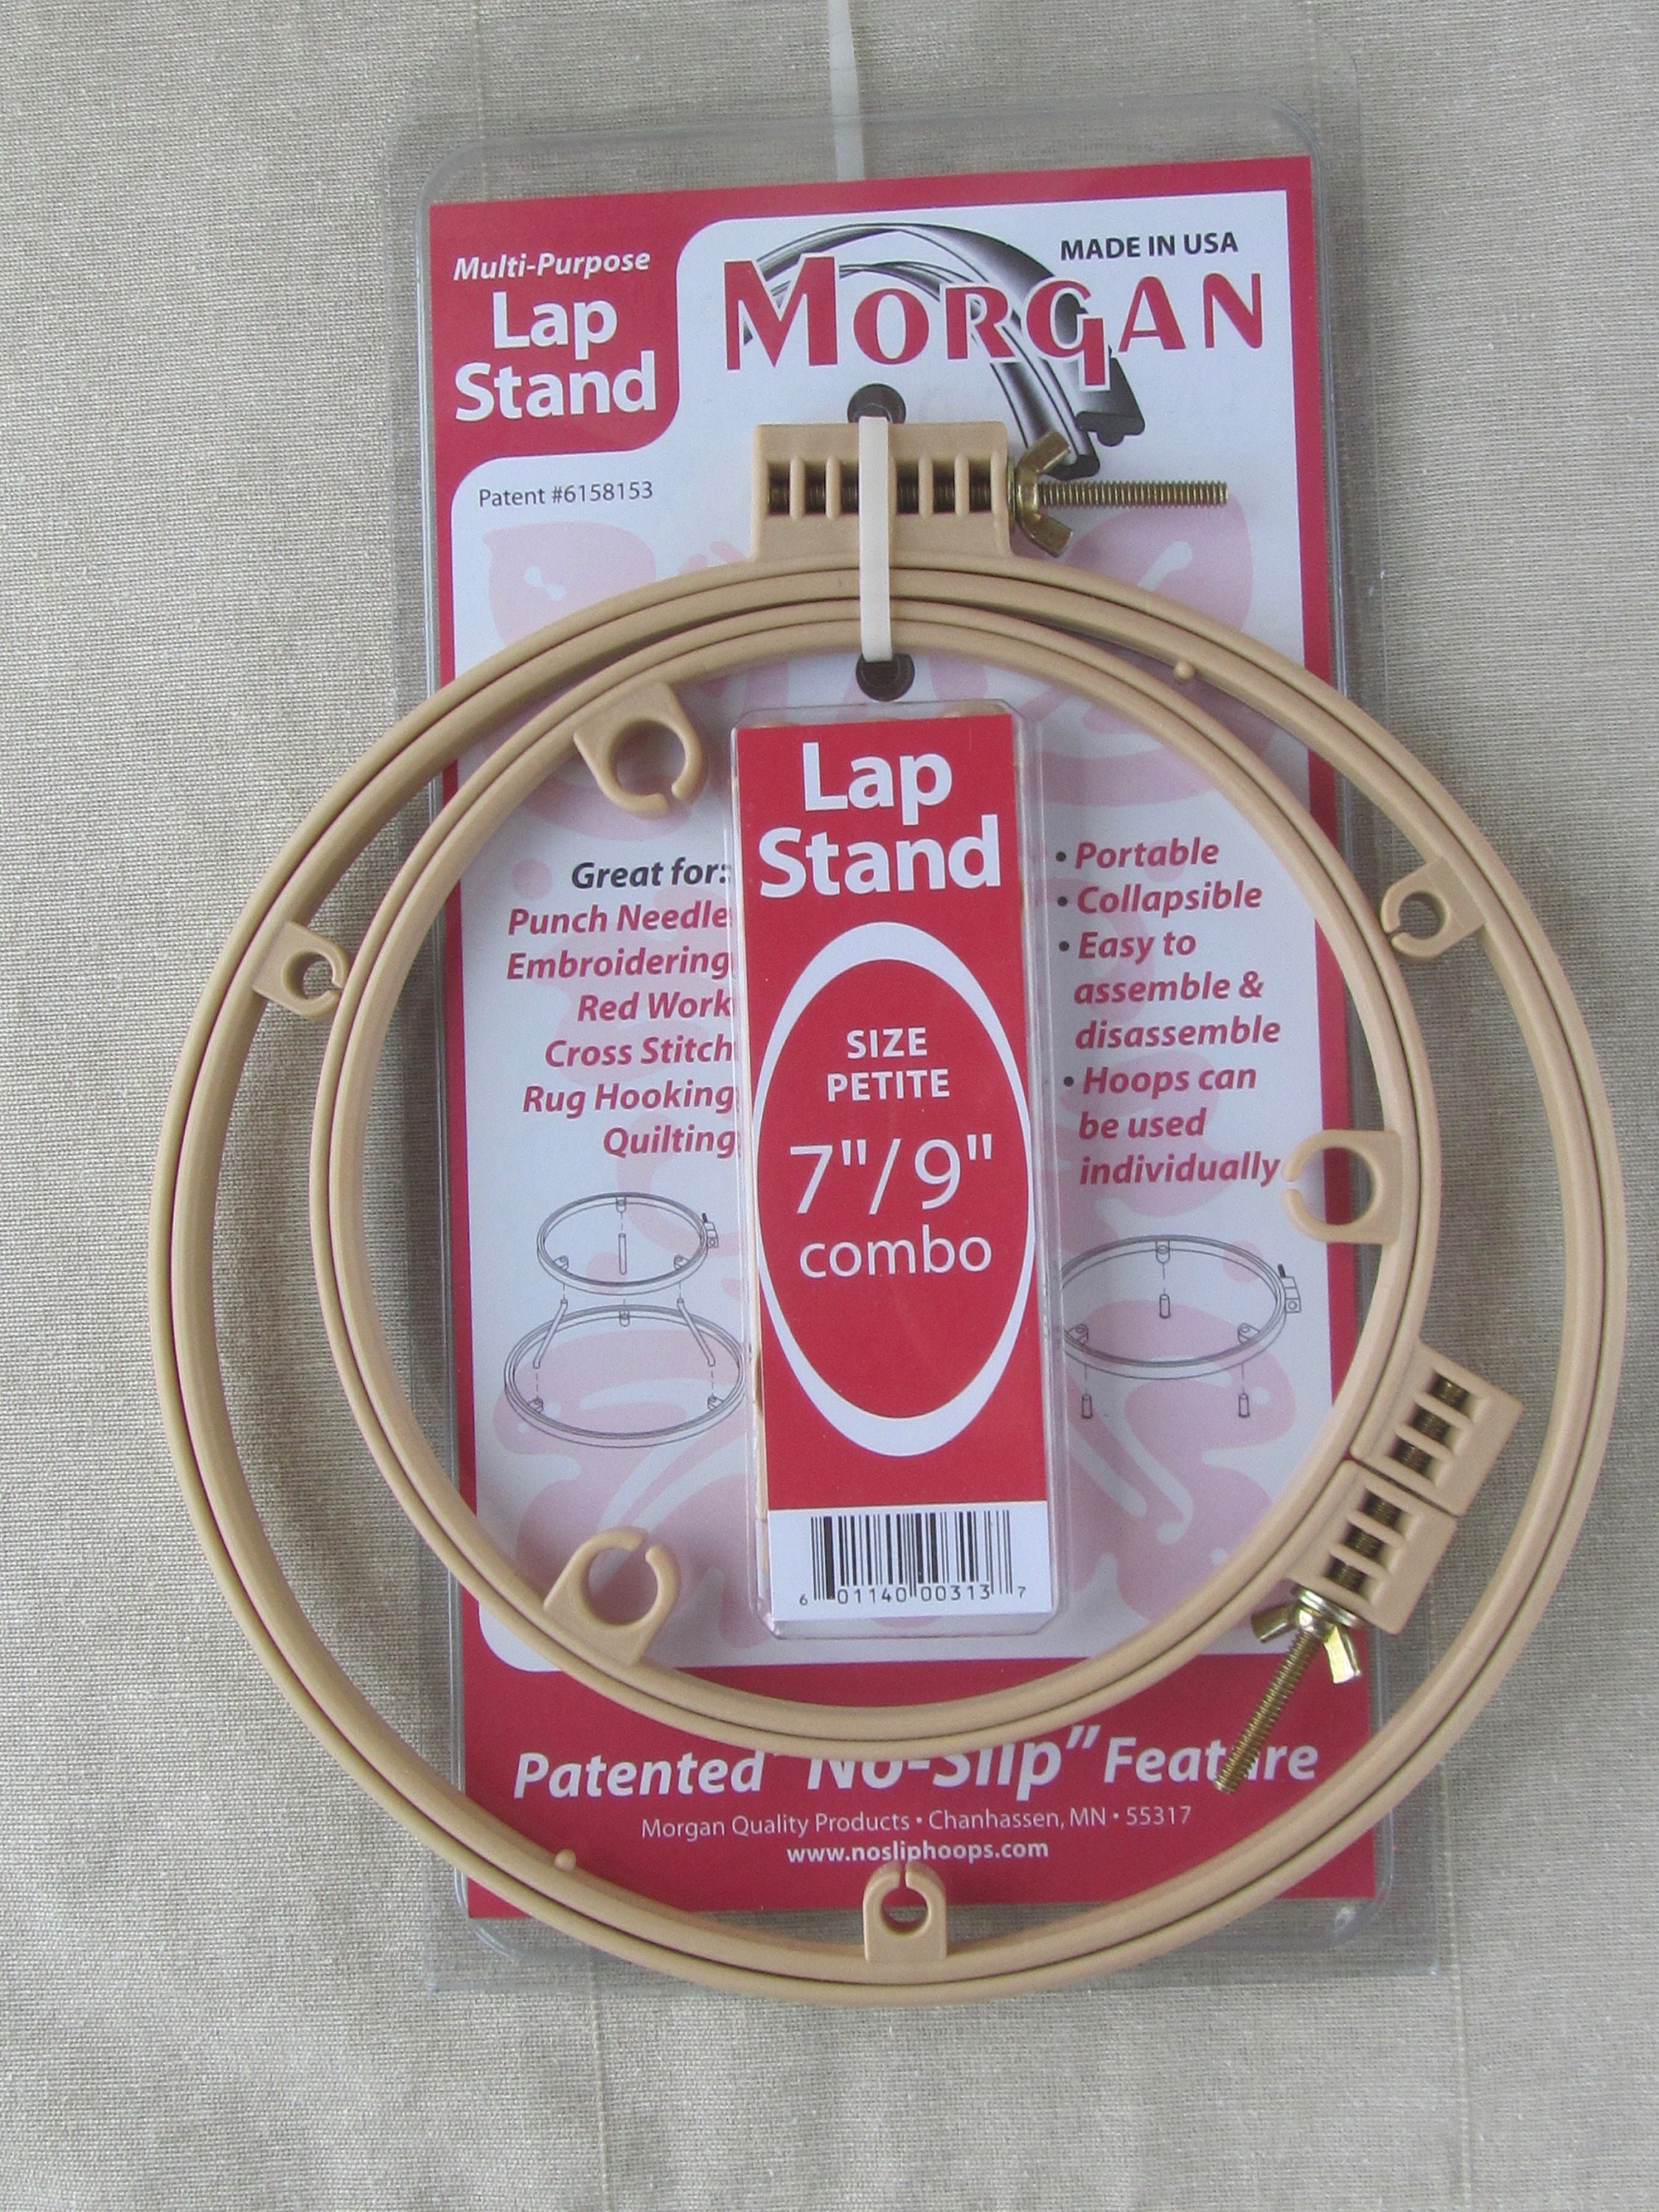 Embroidery & Cross-Stitch Hoop Stand - How to assemble it & use it